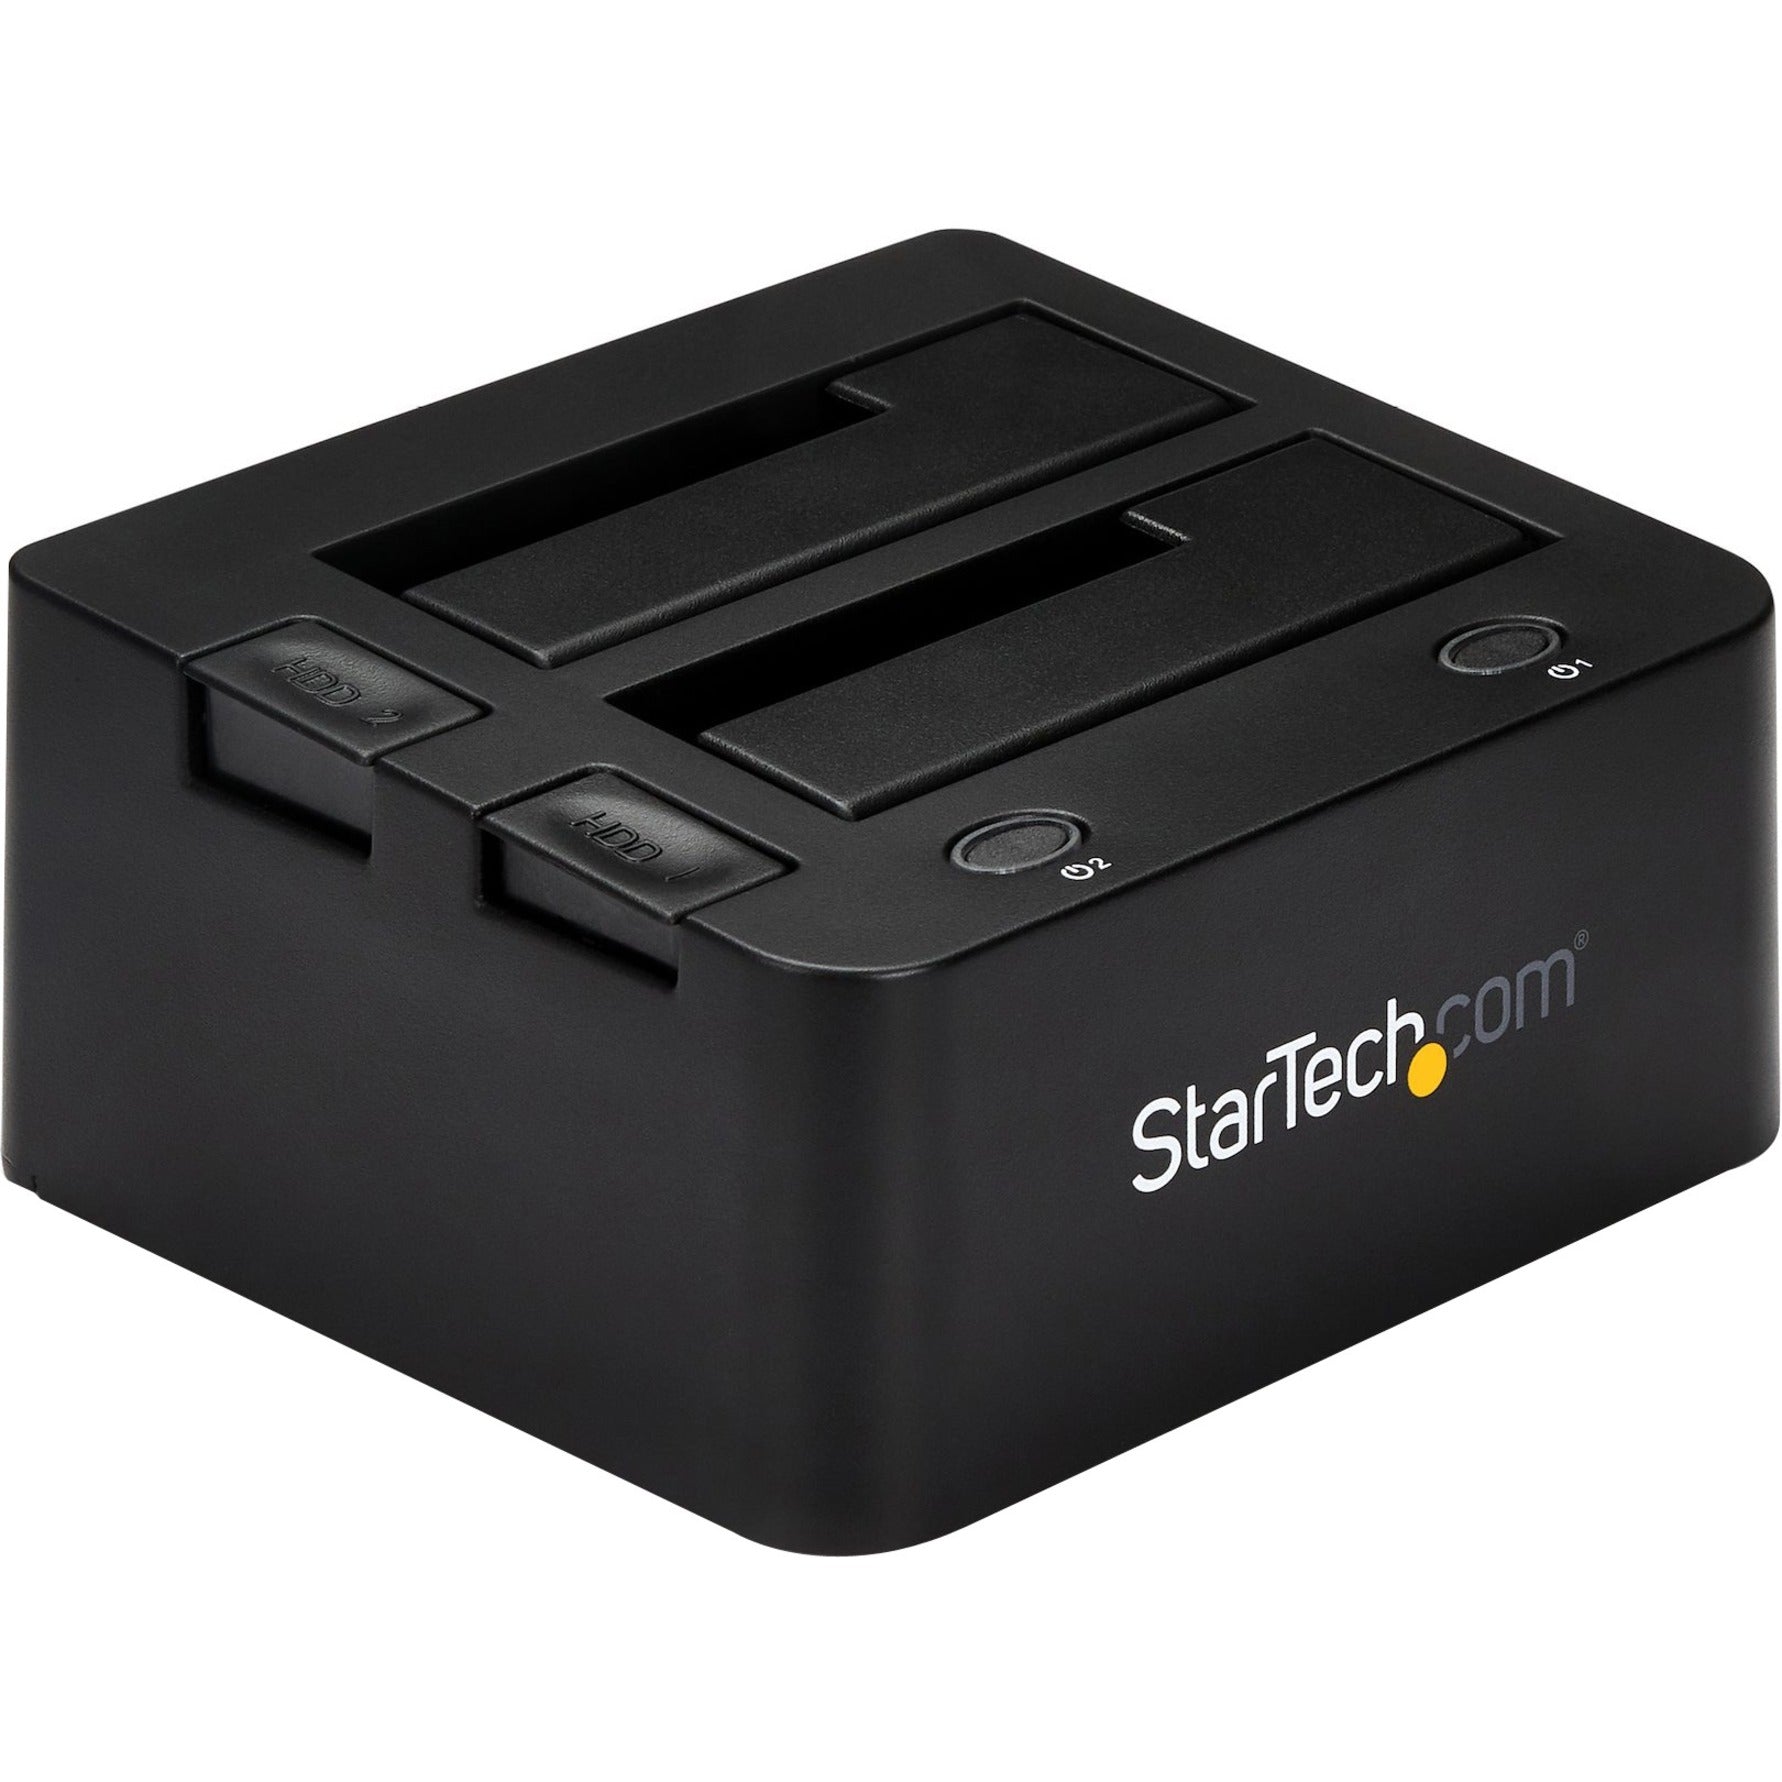 StarTech.com UNIDOCKU33 Universal Docking Station for 2.5/3.5in SATA and IDE Hard Drives - USB 3.0 UASP, Easy Data Transfer and Backup